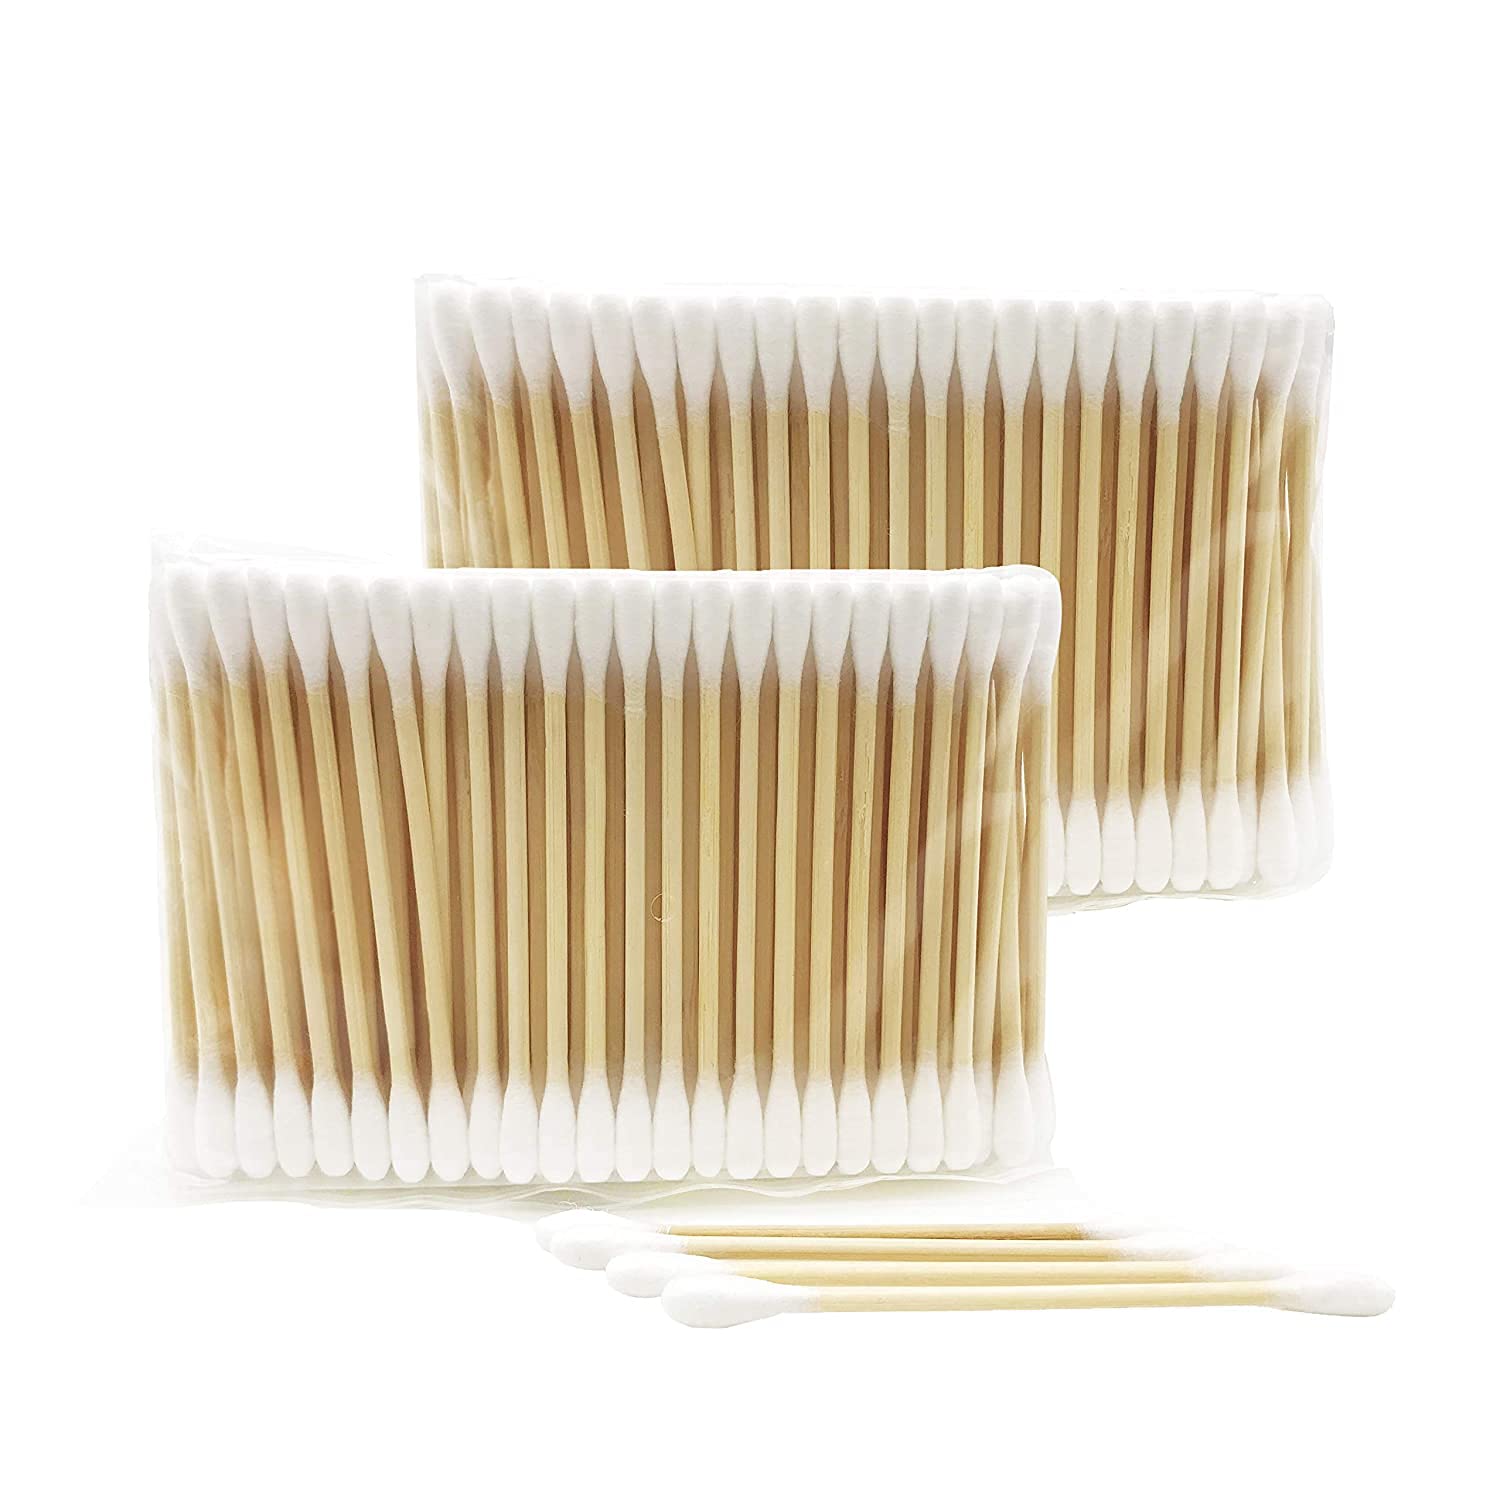 Biodegradable Sterile White Cotton Bud with Wooden Sticker